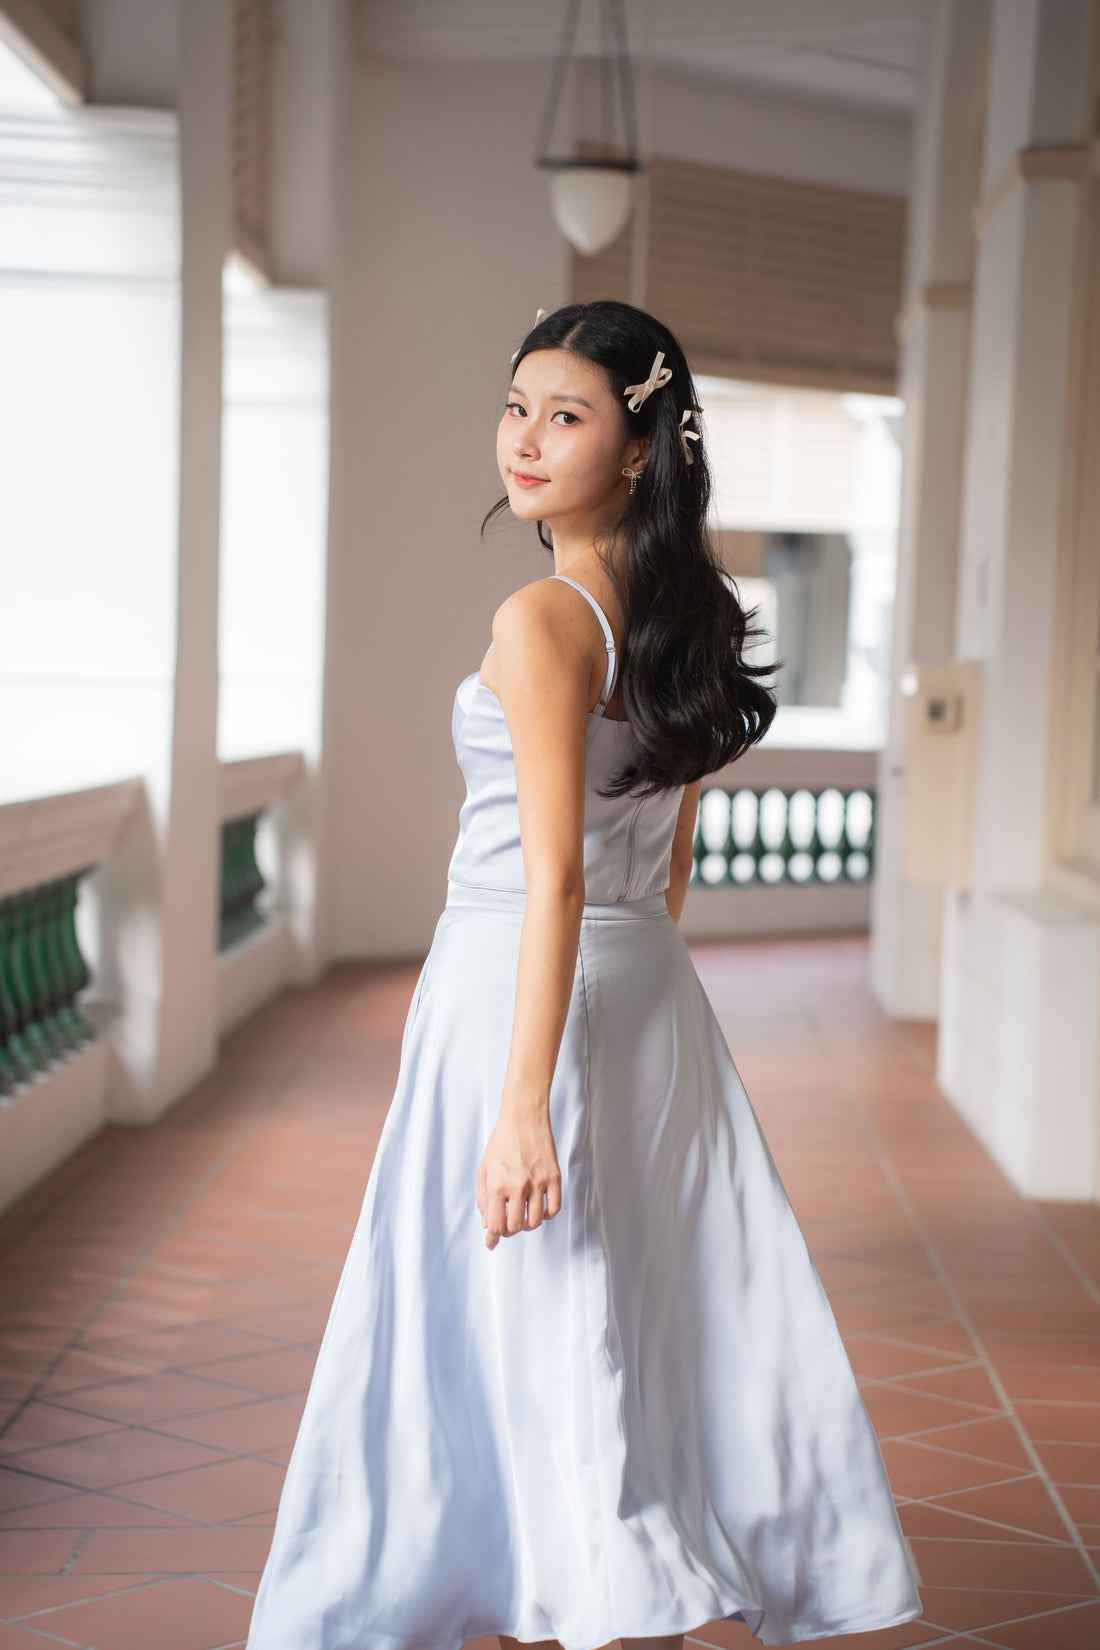 Plus Size Bridal Dresses in Singapore: Tips for Finding the Perfect Fit